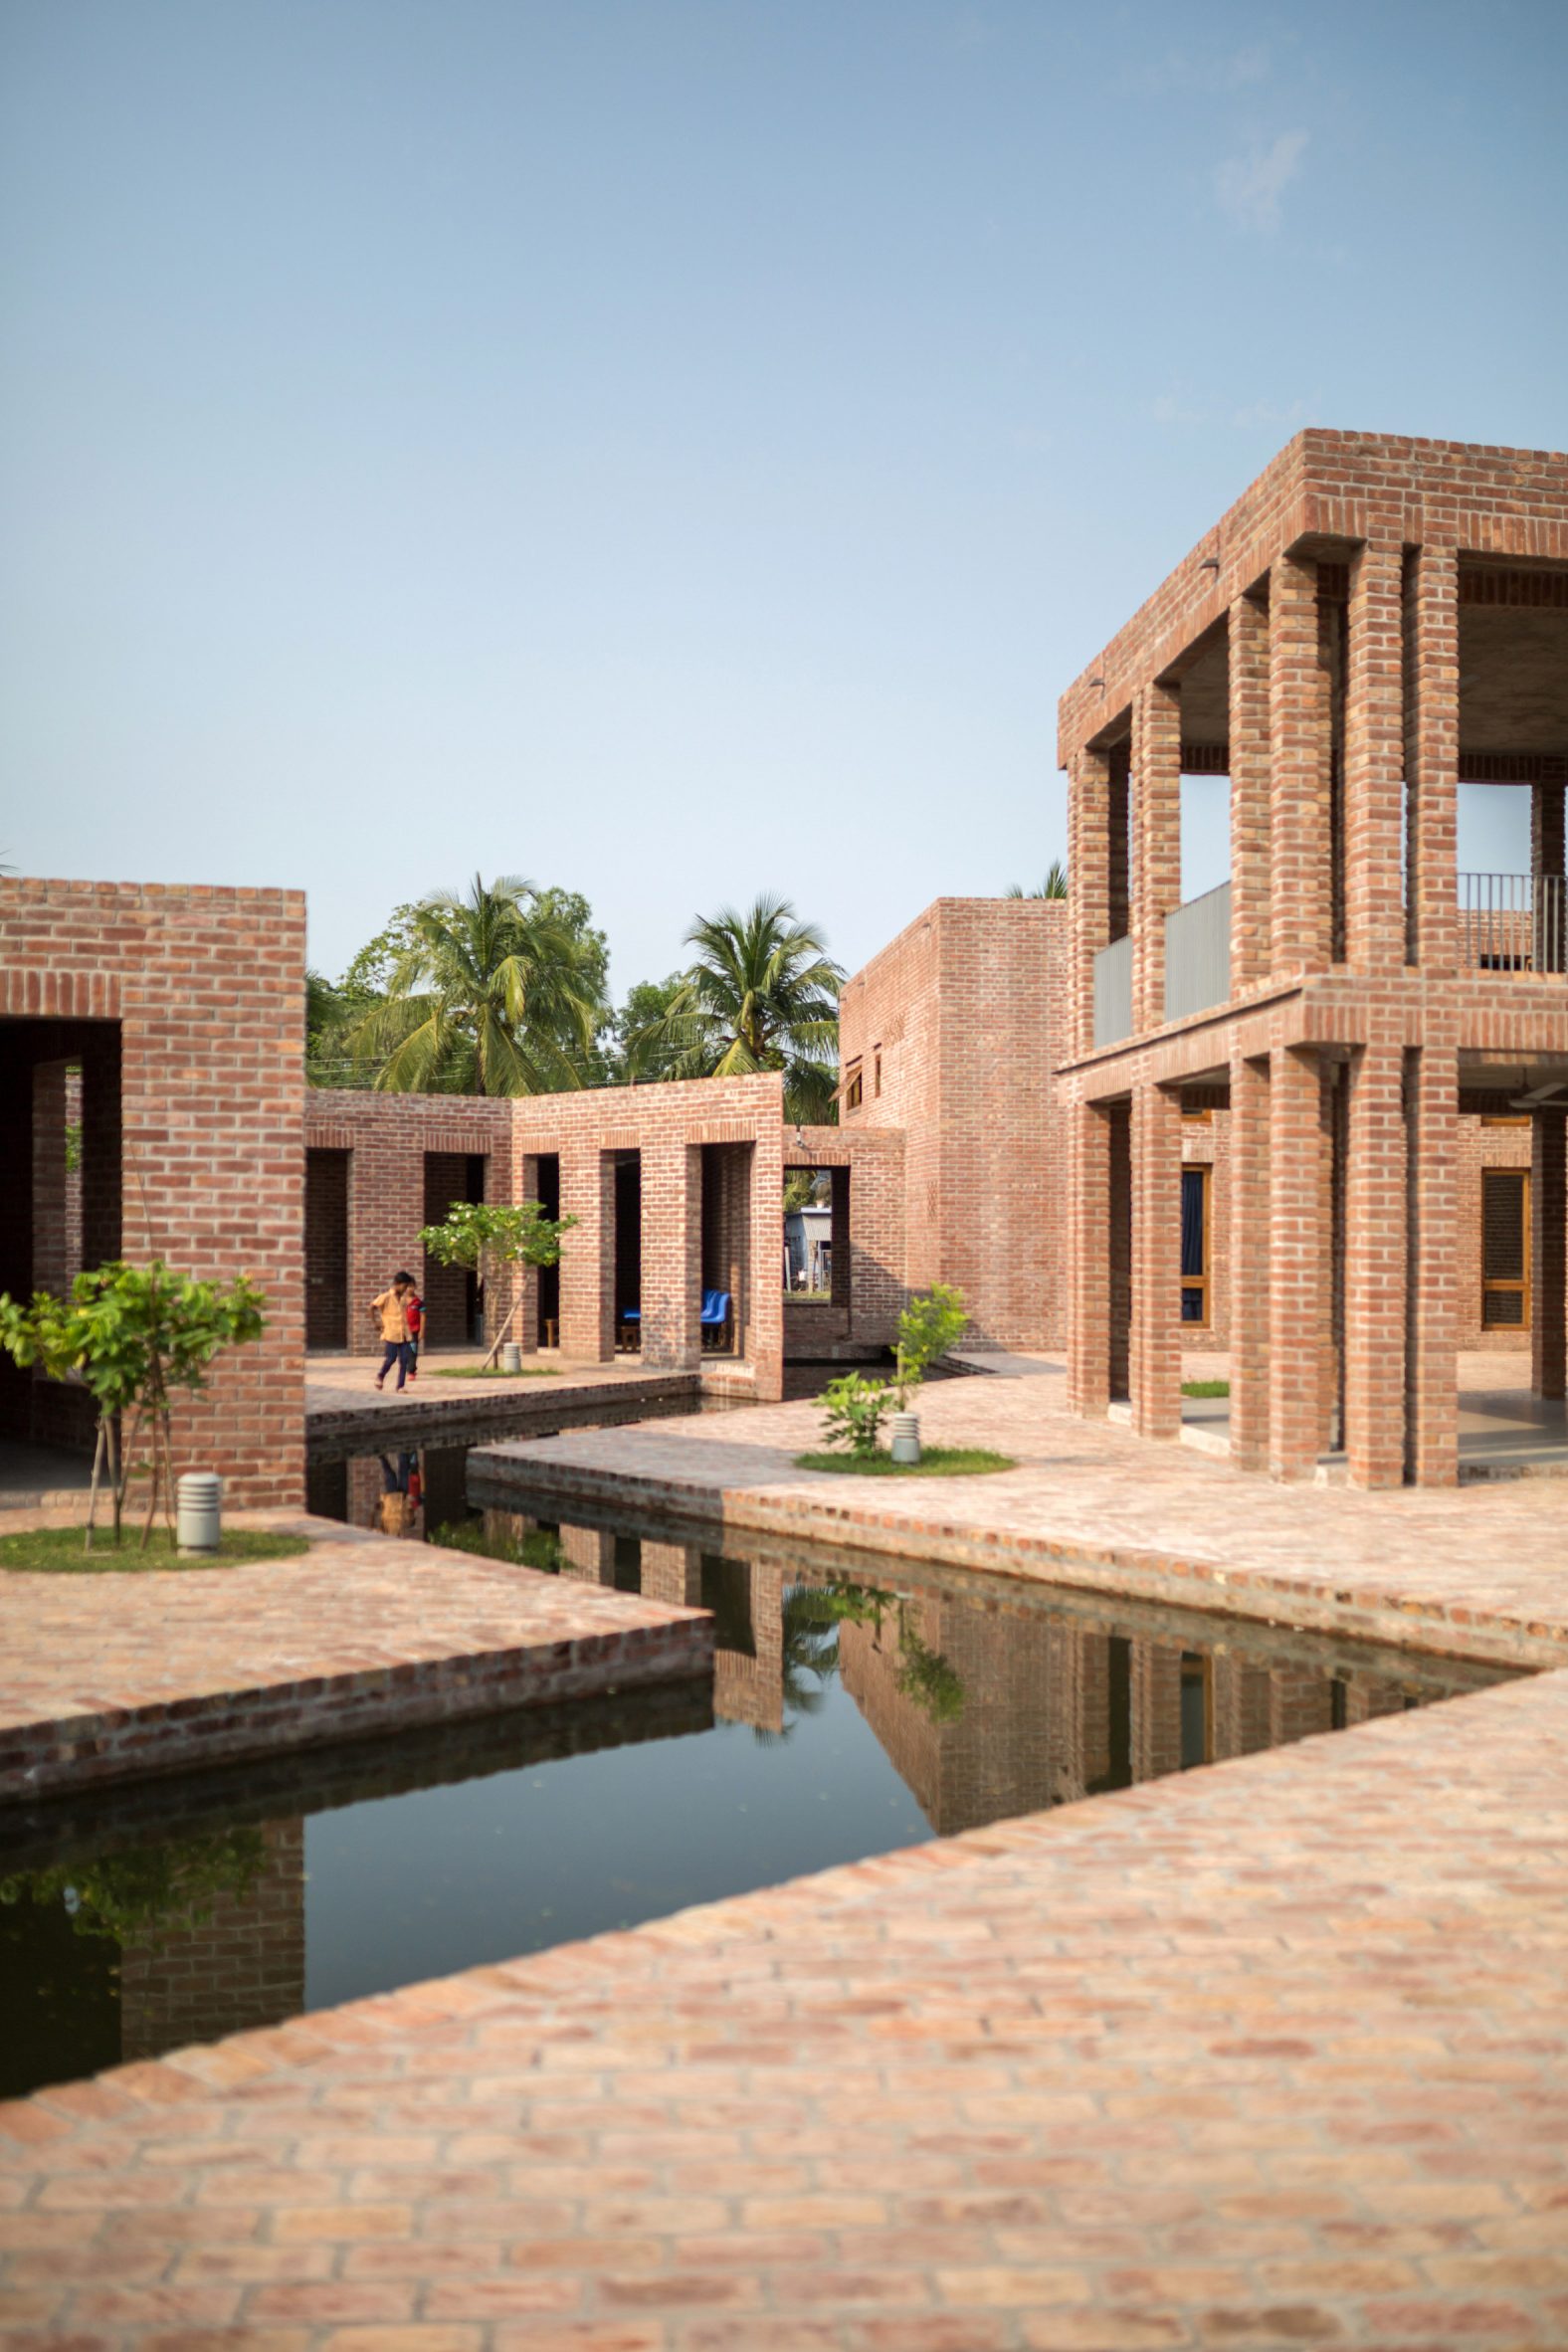 Friendship Hospital which was shortlisted for RIBAs International Prize was made using brick